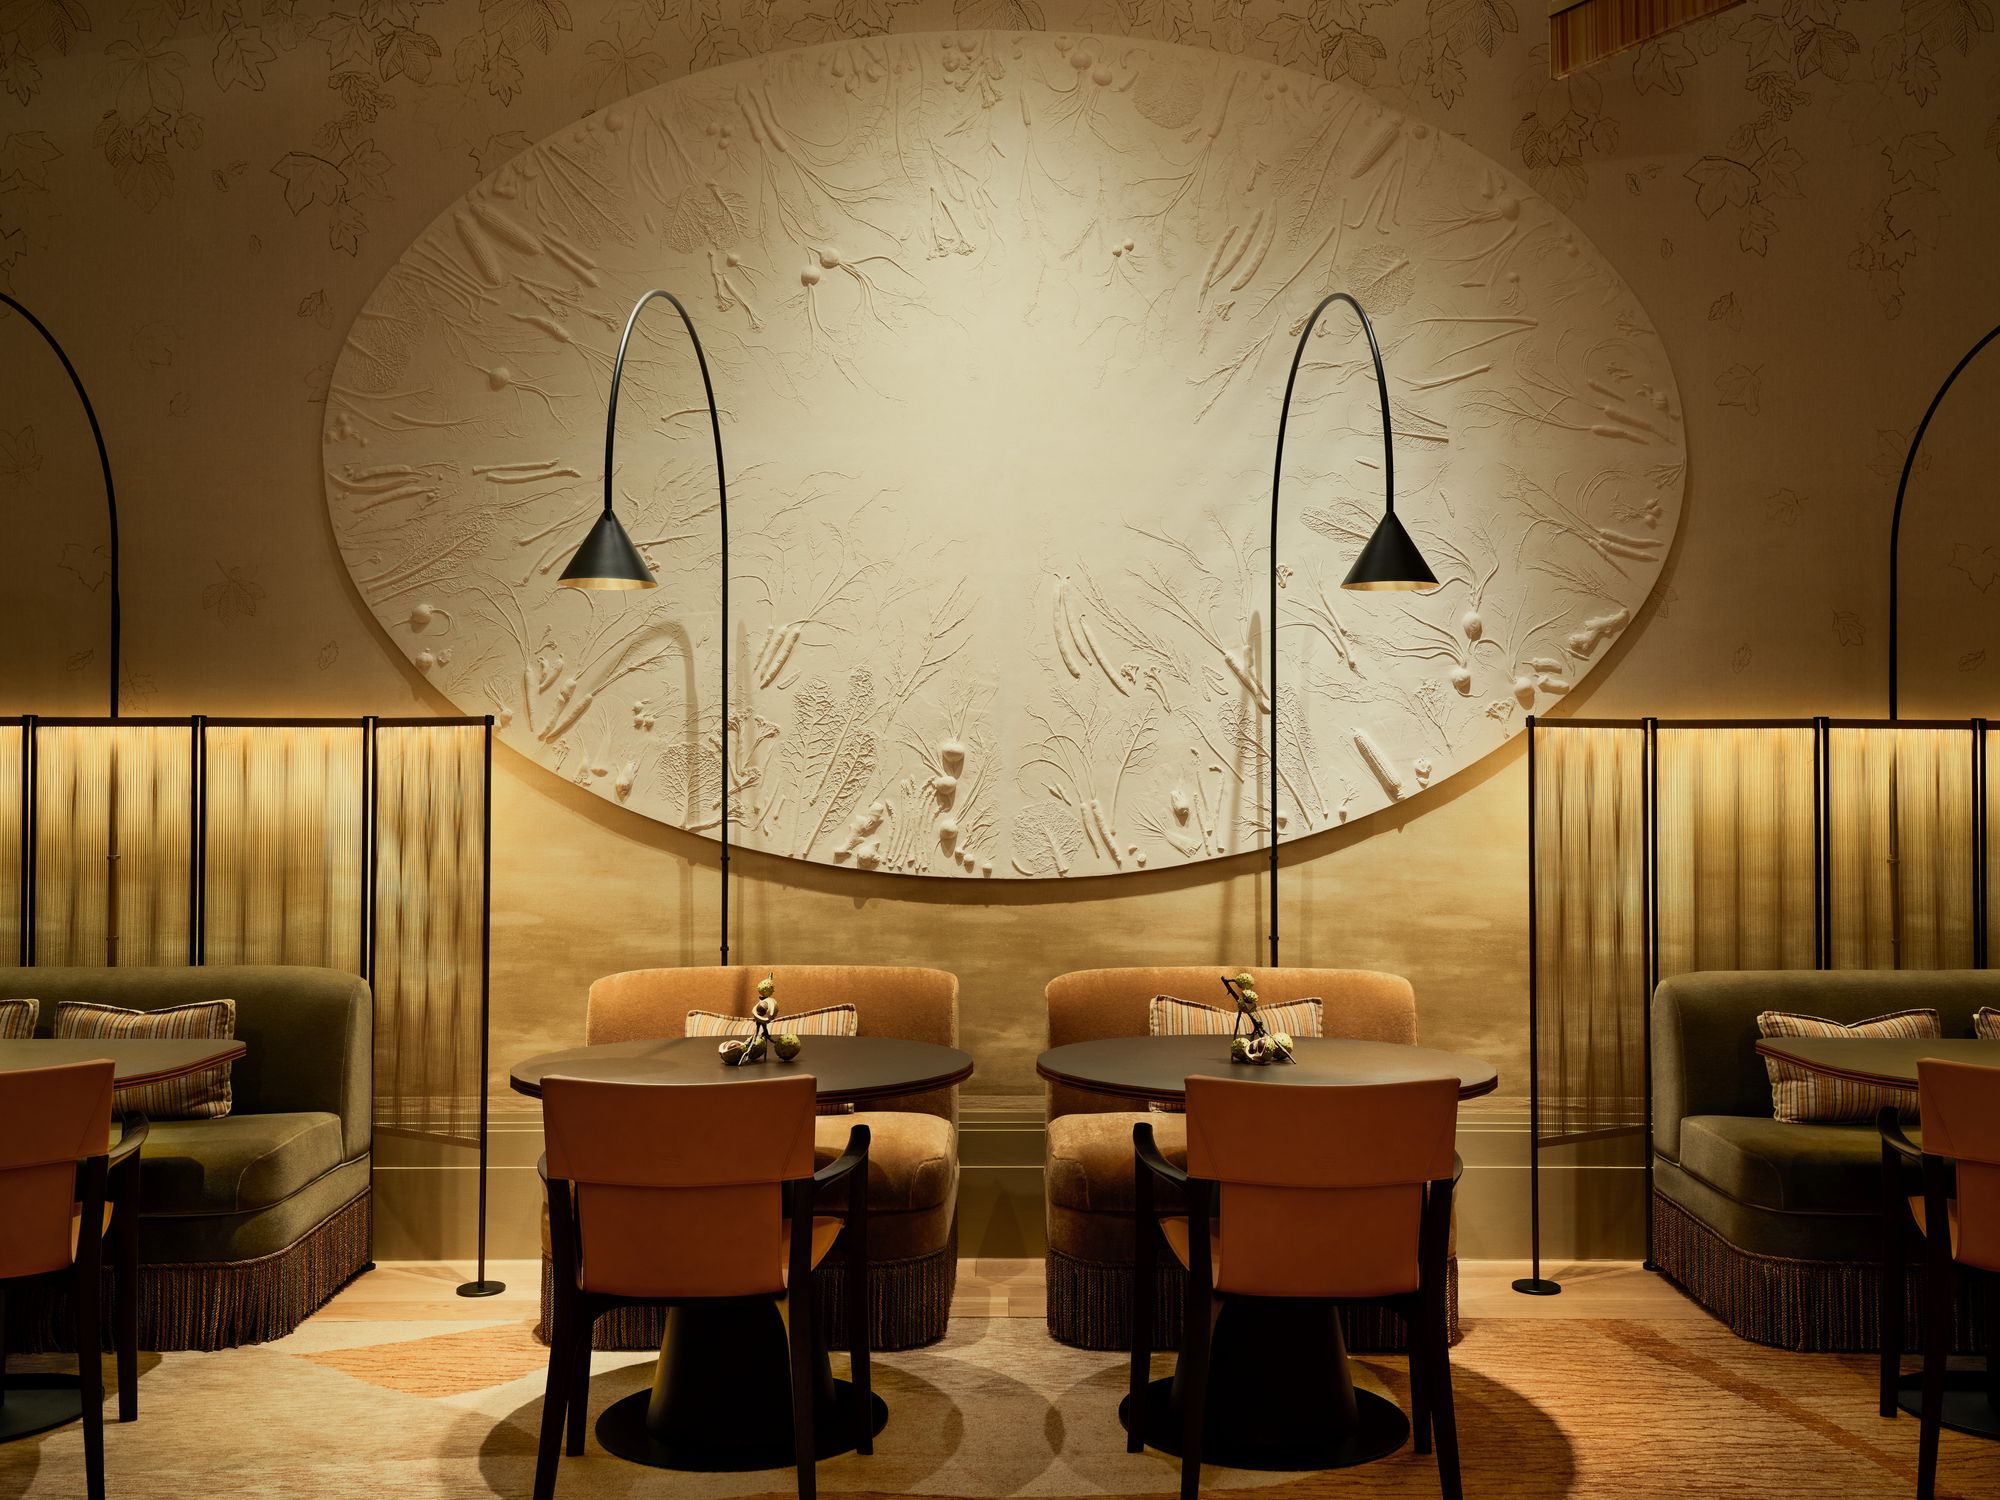 design hotspot: woven by adam smith at coworth park, a visual feast to reflect the michelin-starred cuisine